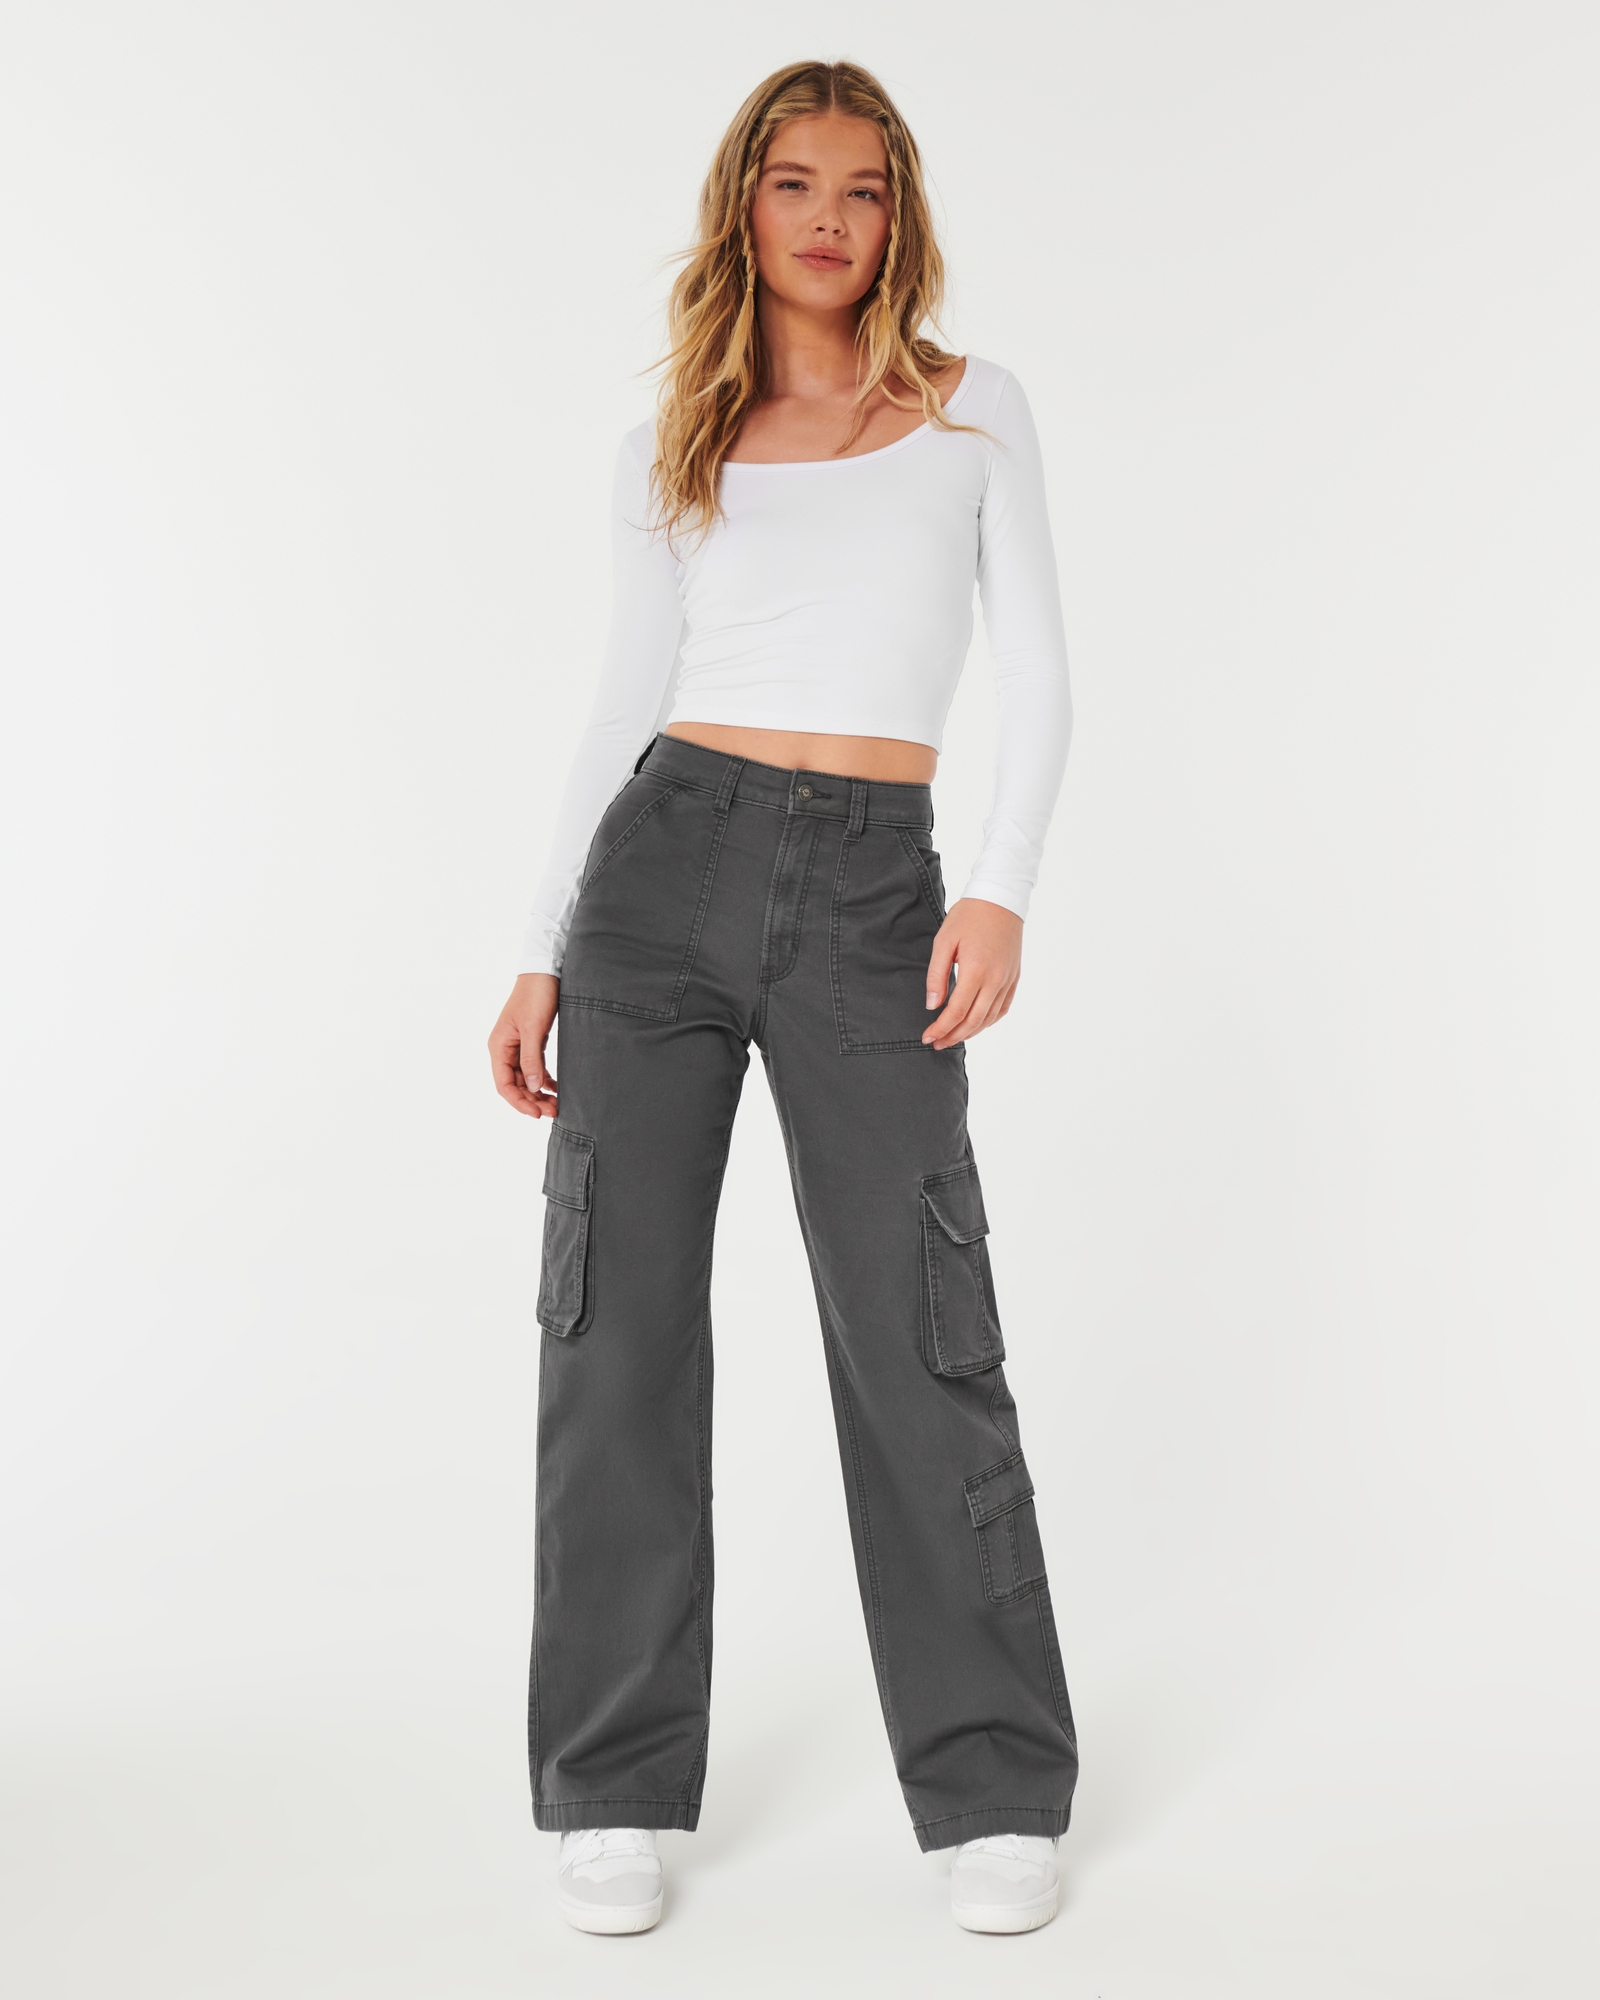 https://img.hollisterco.com/is/image/anf/KIC_356-3074-0364-131_model1.jpg?policy=product-extra-large